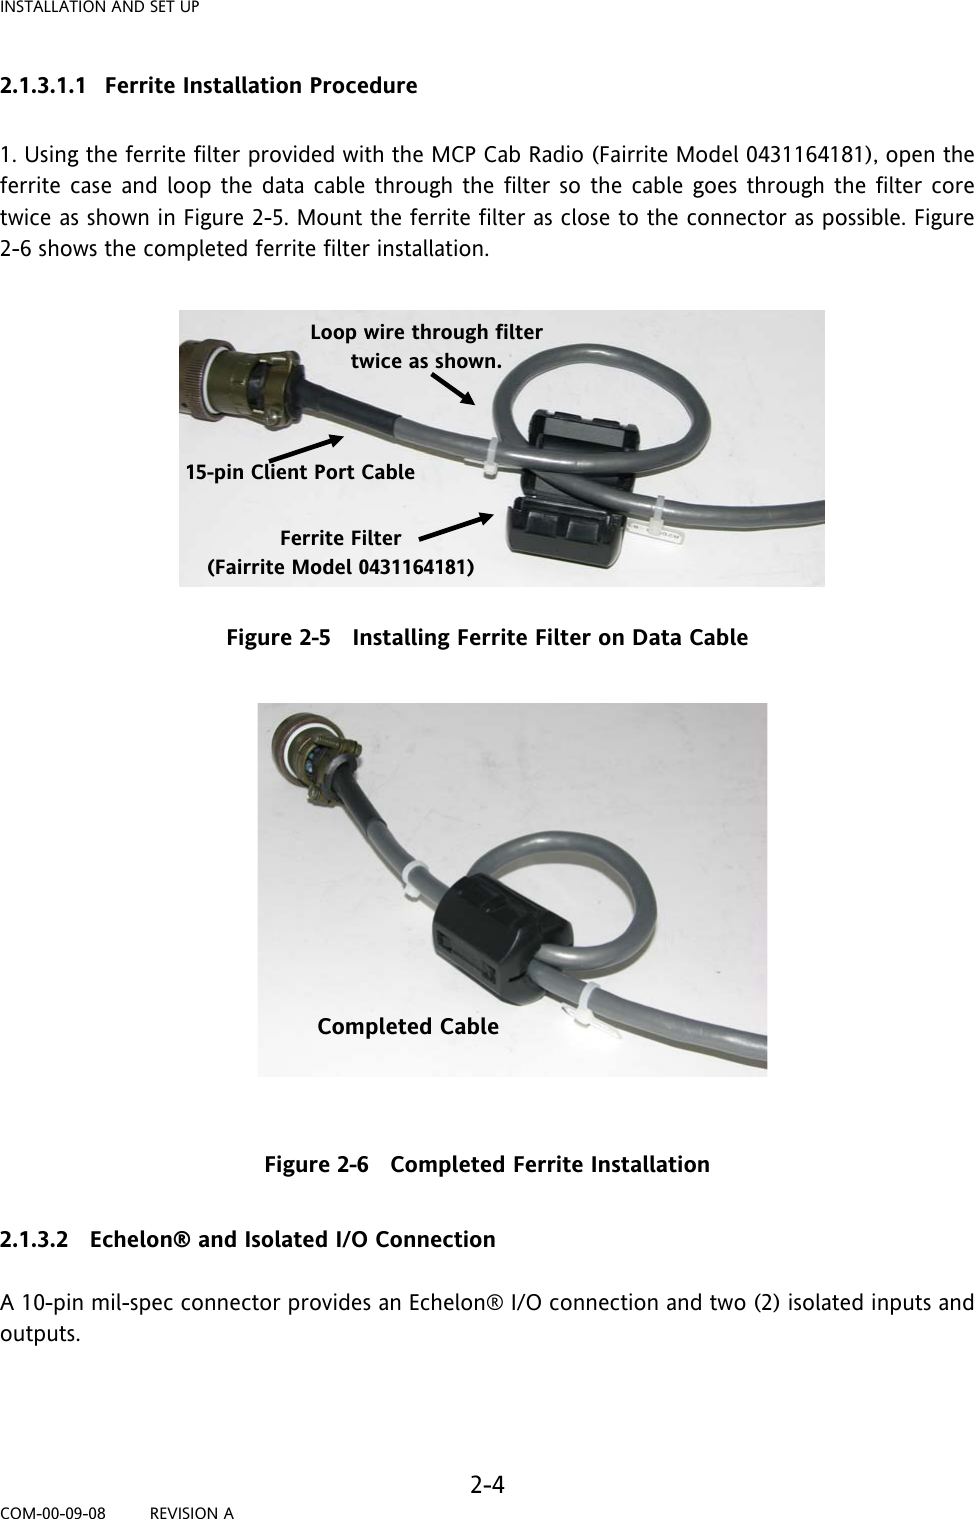 INSTALLATION AND SET UP   2-4 COM-00-09-08         REVISION A 2.1.3.1.1 Ferrite Installation Procedure  1. Using the ferrite filter provided with the MCP Cab Radio (Fairrite Model 0431164181), open the ferrite case and loop the data cable through the filter so the cable goes through the filter core twice as shown in Figure 2-5. Mount the ferrite filter as close to the connector as possible. Figure 2-6 shows the completed ferrite filter installation.            Figure 2-5   Installing Ferrite Filter on Data Cable                Figure 2-6   Completed Ferrite Installation  2.1.3.2 Echelon® and Isolated I/O Connection  A 10-pin mil-spec connector provides an Echelon® I/O connection and two (2) isolated inputs and outputs.     Ferrite Filter (Fairrite Model 0431164181) 15-pin Client Port Cable  Loop wire through filter twice as shown. Completed Cable 